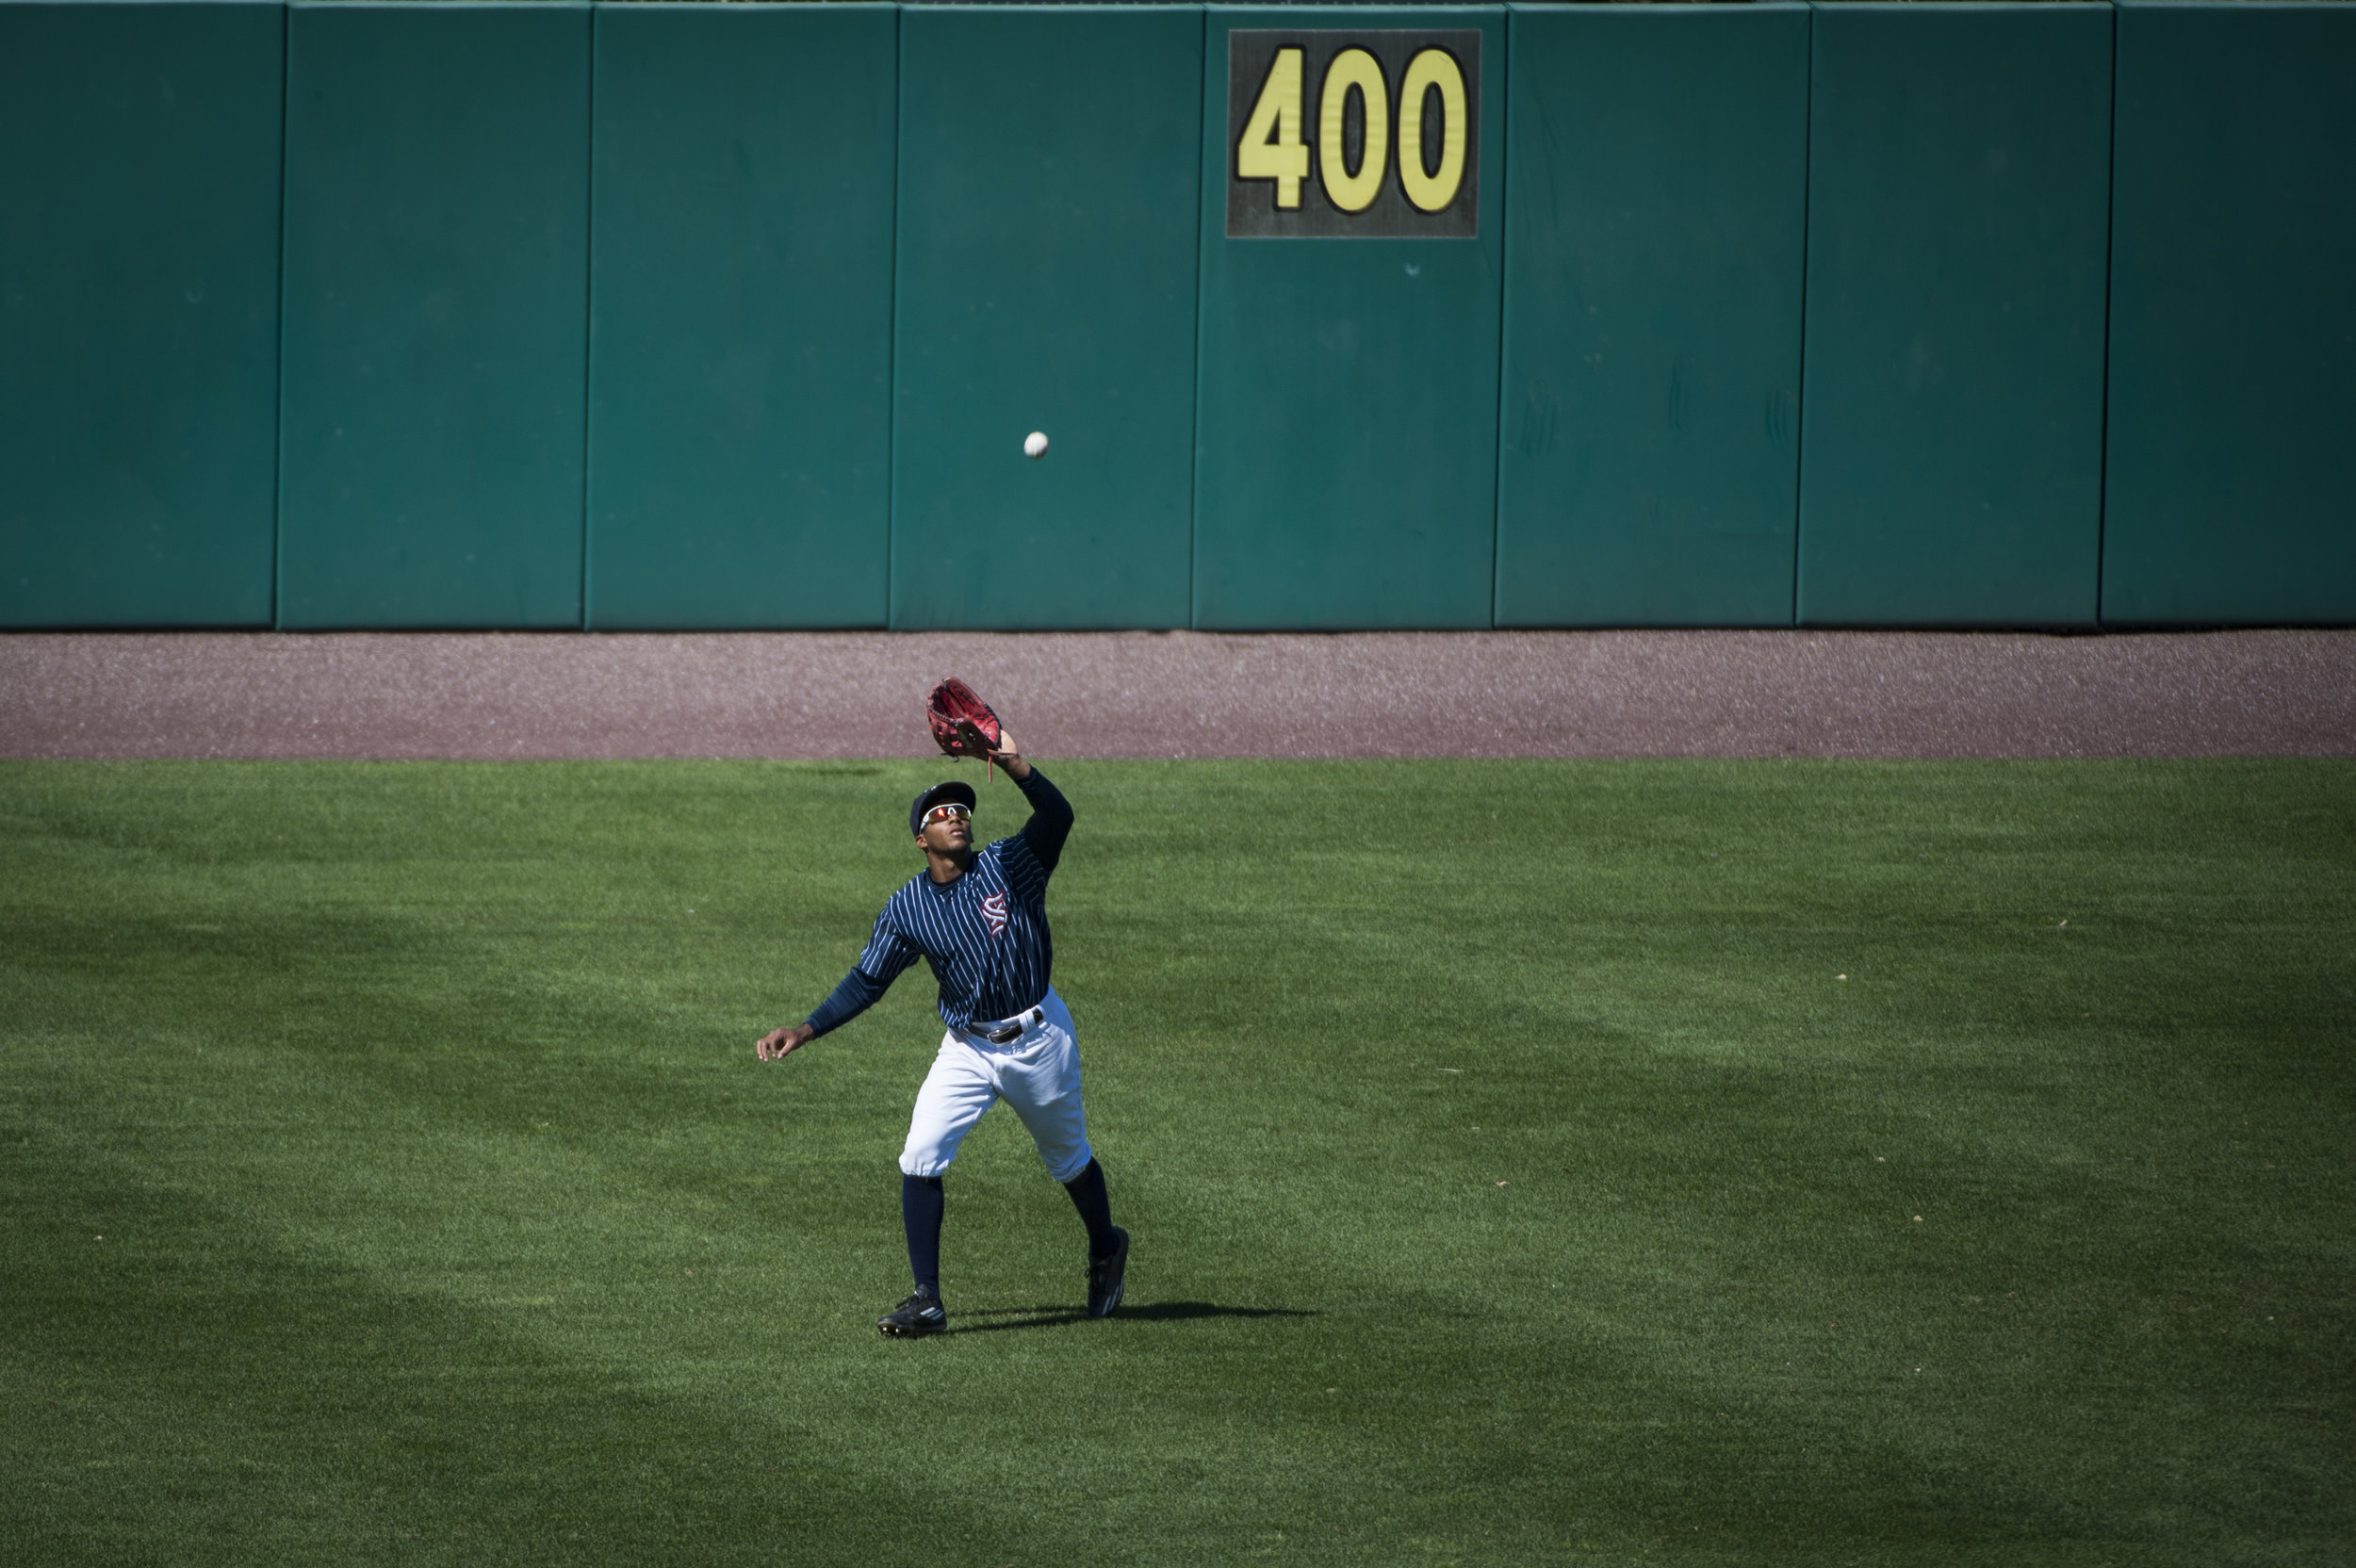  Rafael Bautista catches a fly ball during the Syracuse Chiefs game against the Norfolk Tides on April 23rd, 2017. “He’s an outstanding outfielder, runs exceptionally well, has a good throwing arm and he pays attention, that’s what I like most about 